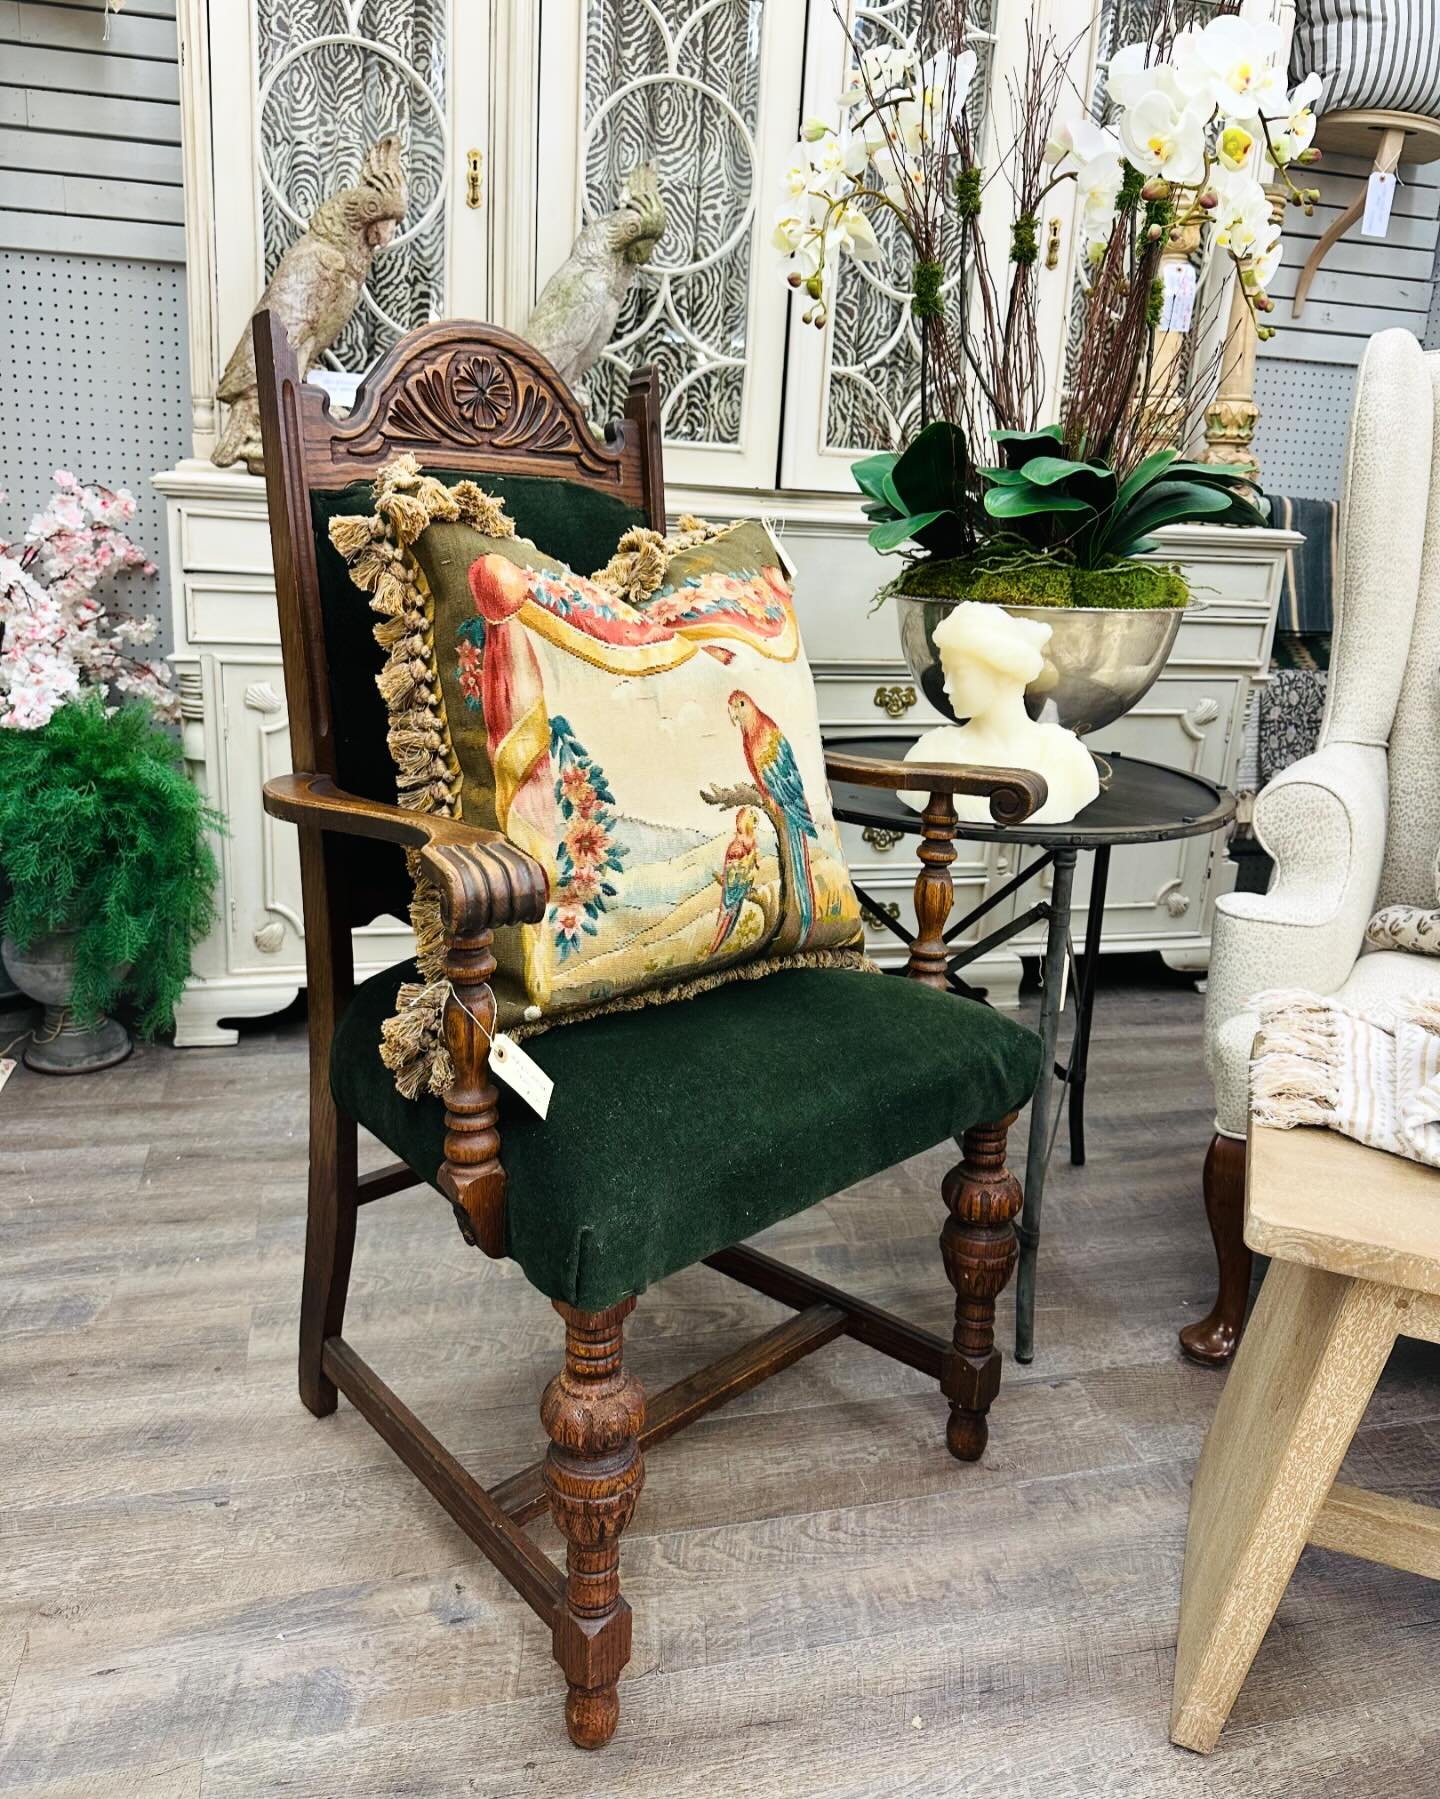 There aren&rsquo;t a lot of guarantees in life, but here&rsquo;s something we know for sure: Every bottom needs a chair!

What&rsquo;s your style? Plush and cozy vintage? Natural fiber woven in an interesting design? Traditional and formal? There are